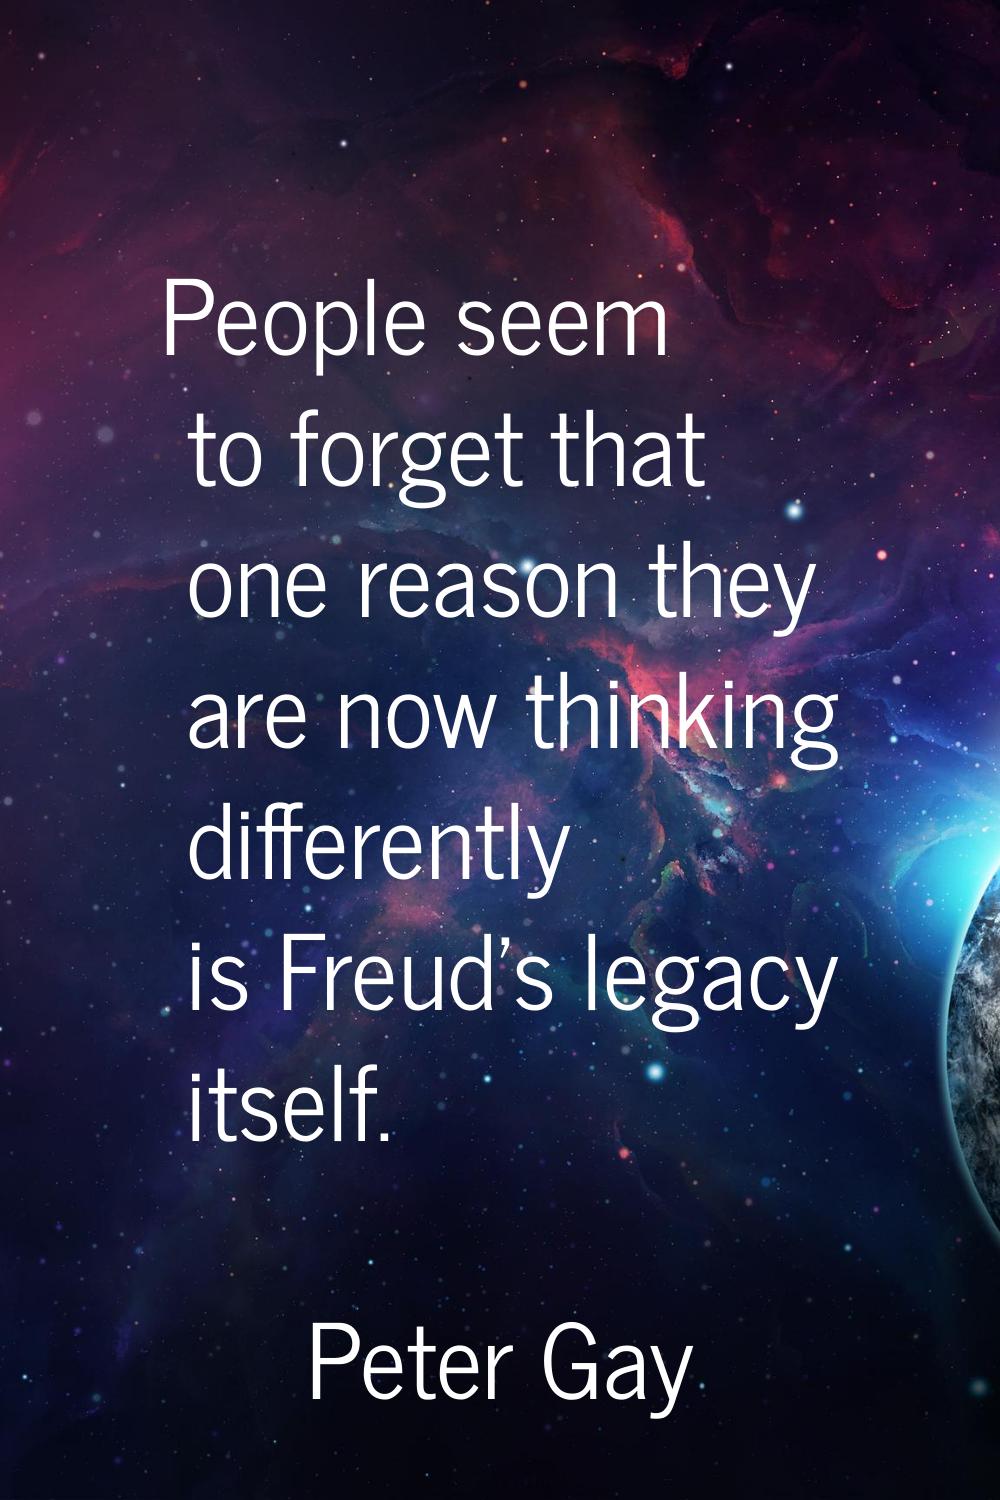 People seem to forget that one reason they are now thinking differently is Freud's legacy itself.